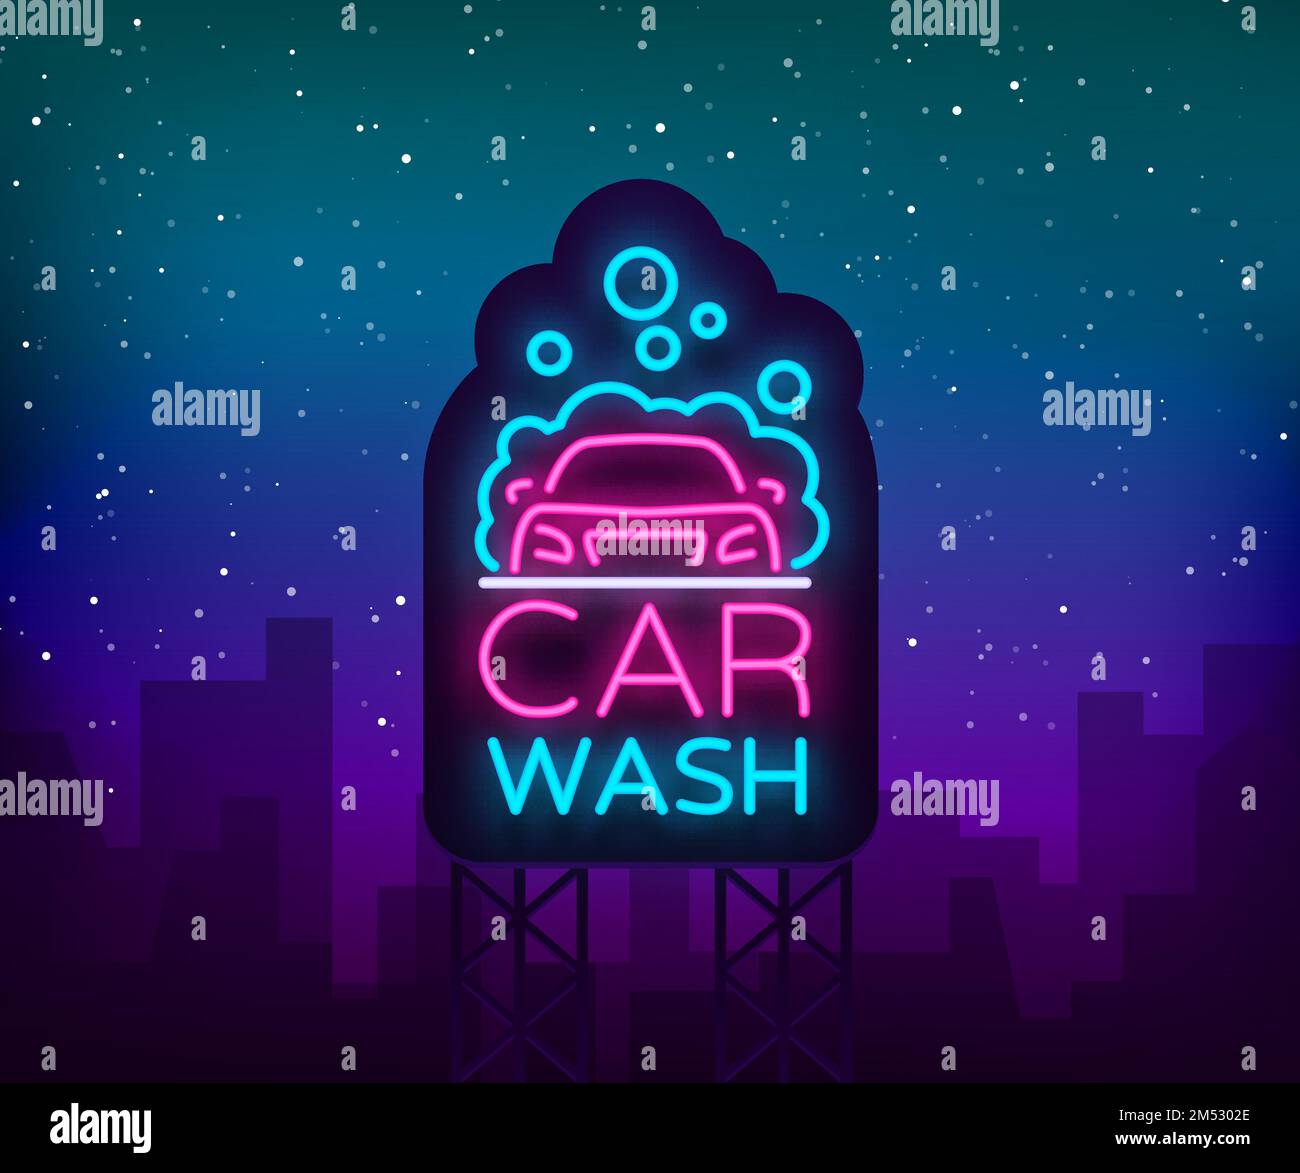 Car wash logo vector design in neon style vector illustration isolated. Template, concept, luminous signboard icon on a car wash theme. Luminous banne Stock Vector